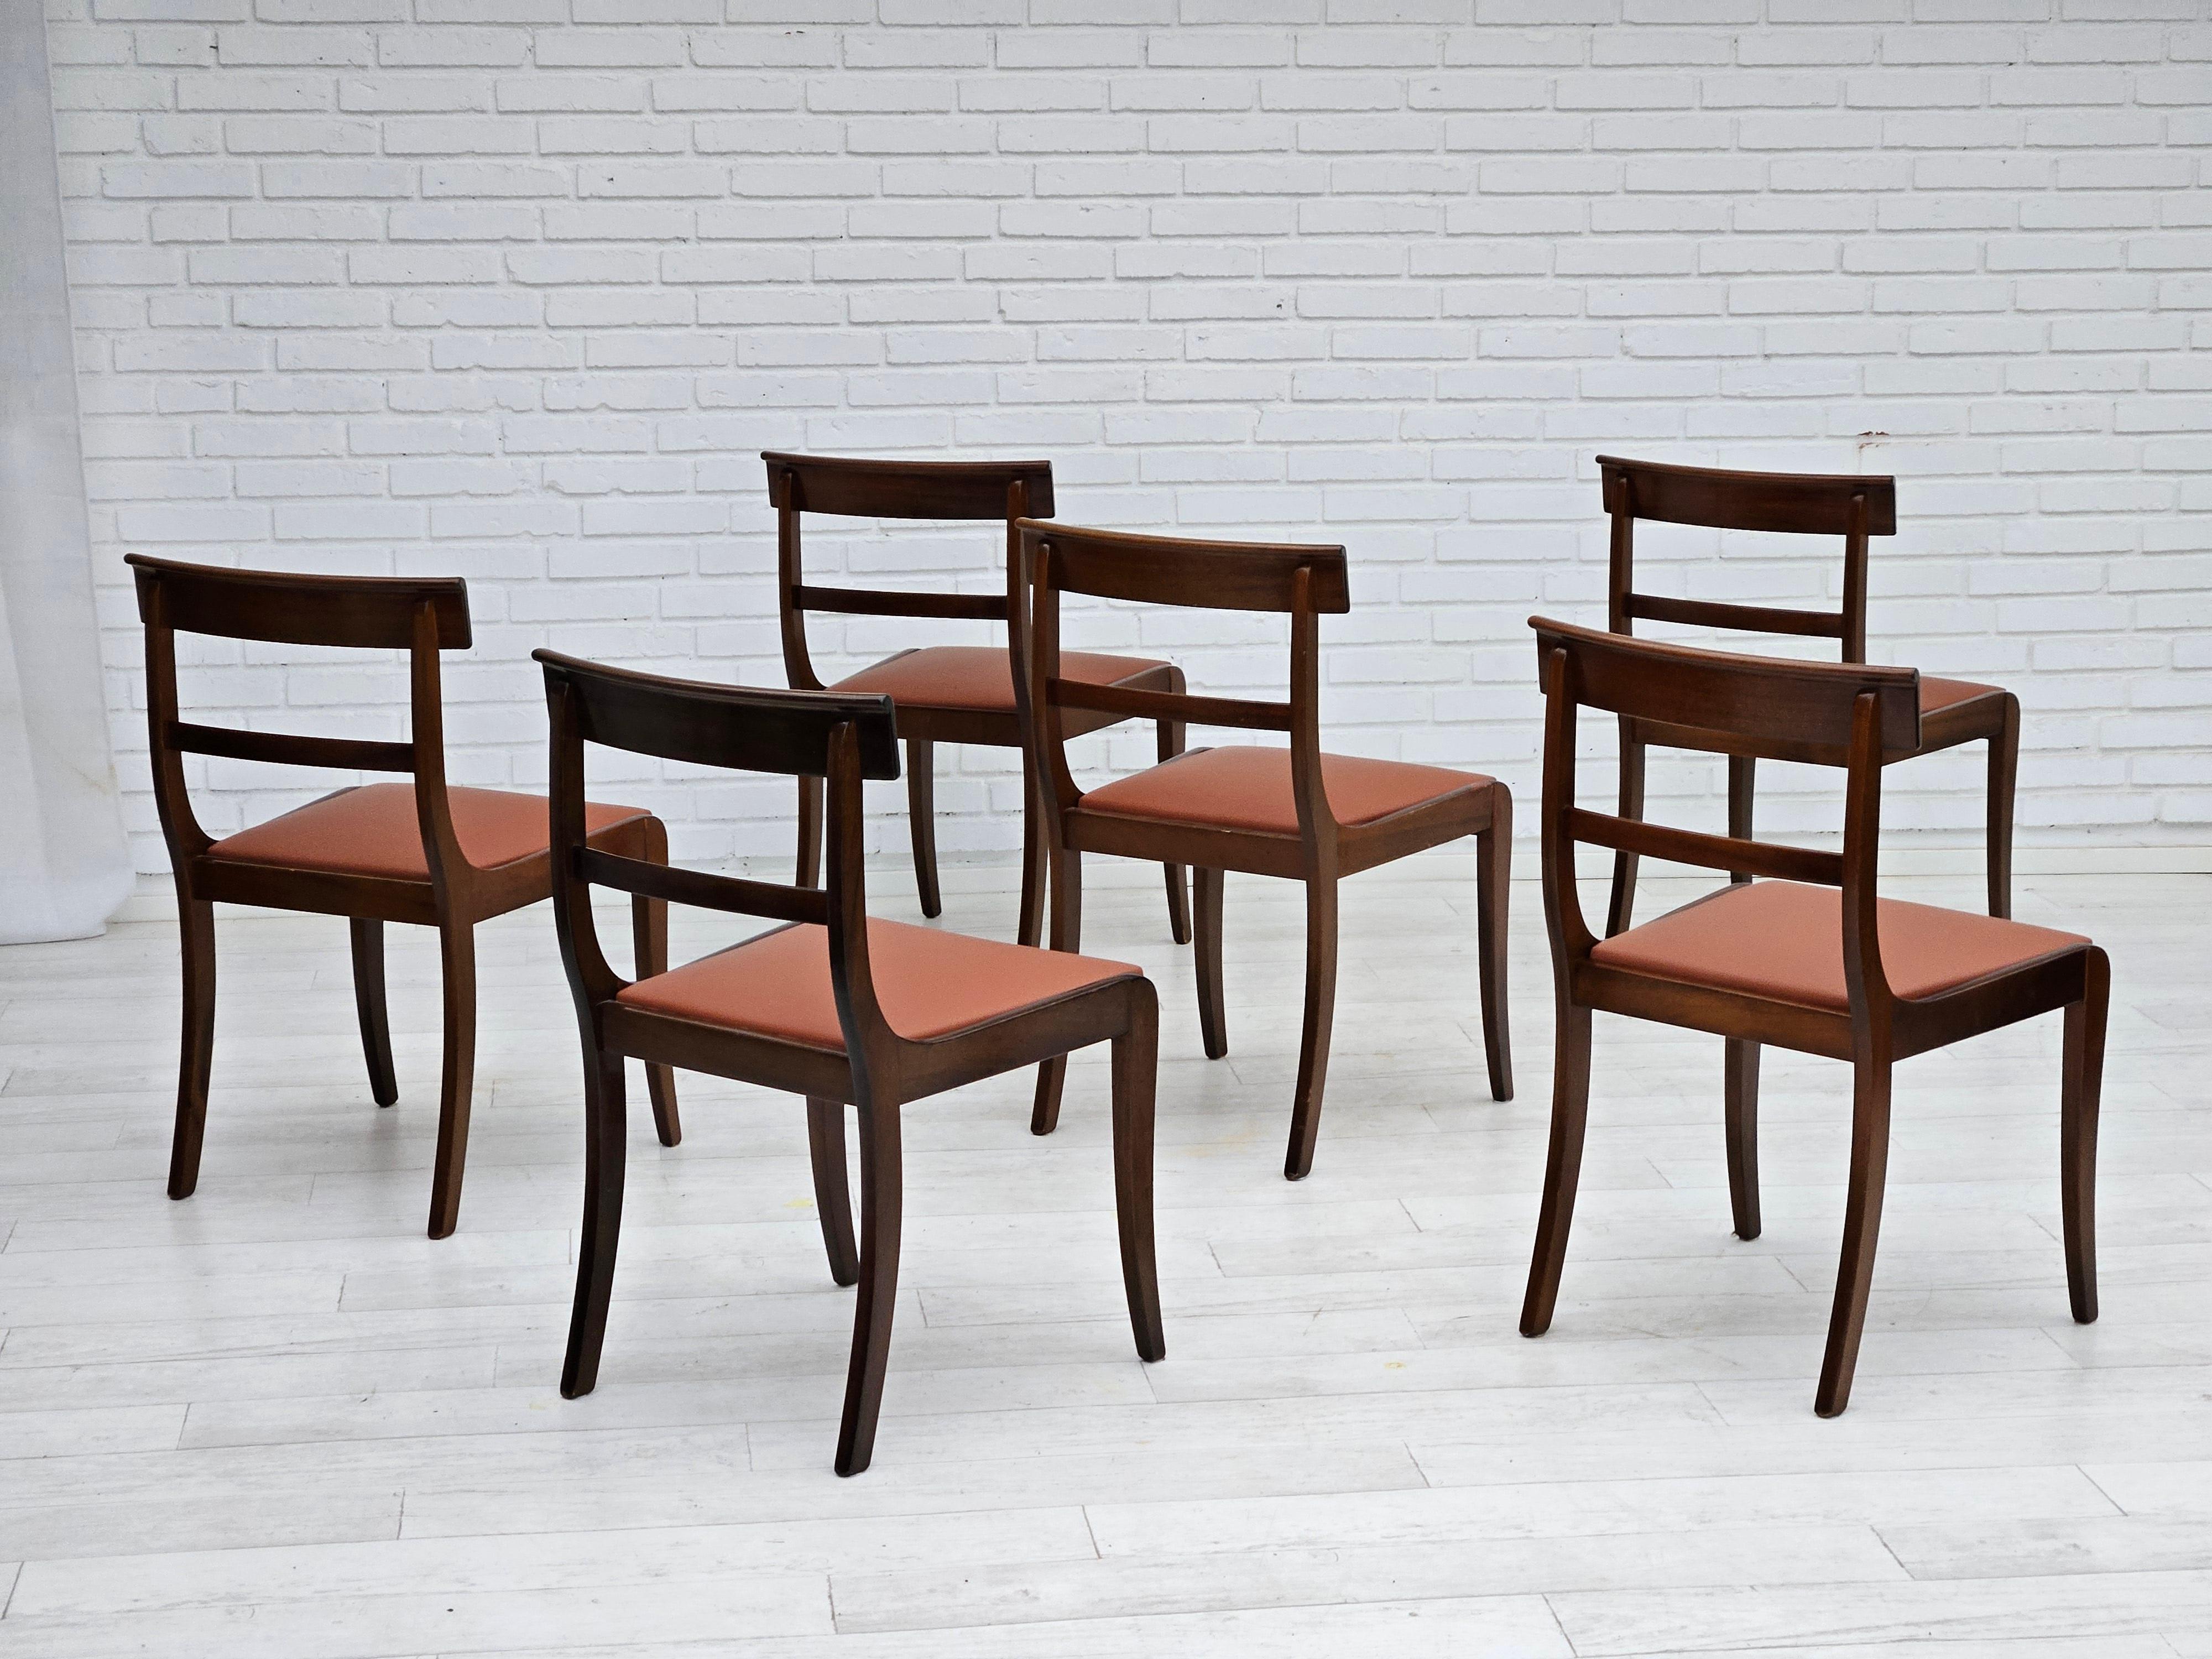 Late 20th Century 1970s, reupholstered set of 6 pcs Danish dining chairs, teak wood, leather. For Sale